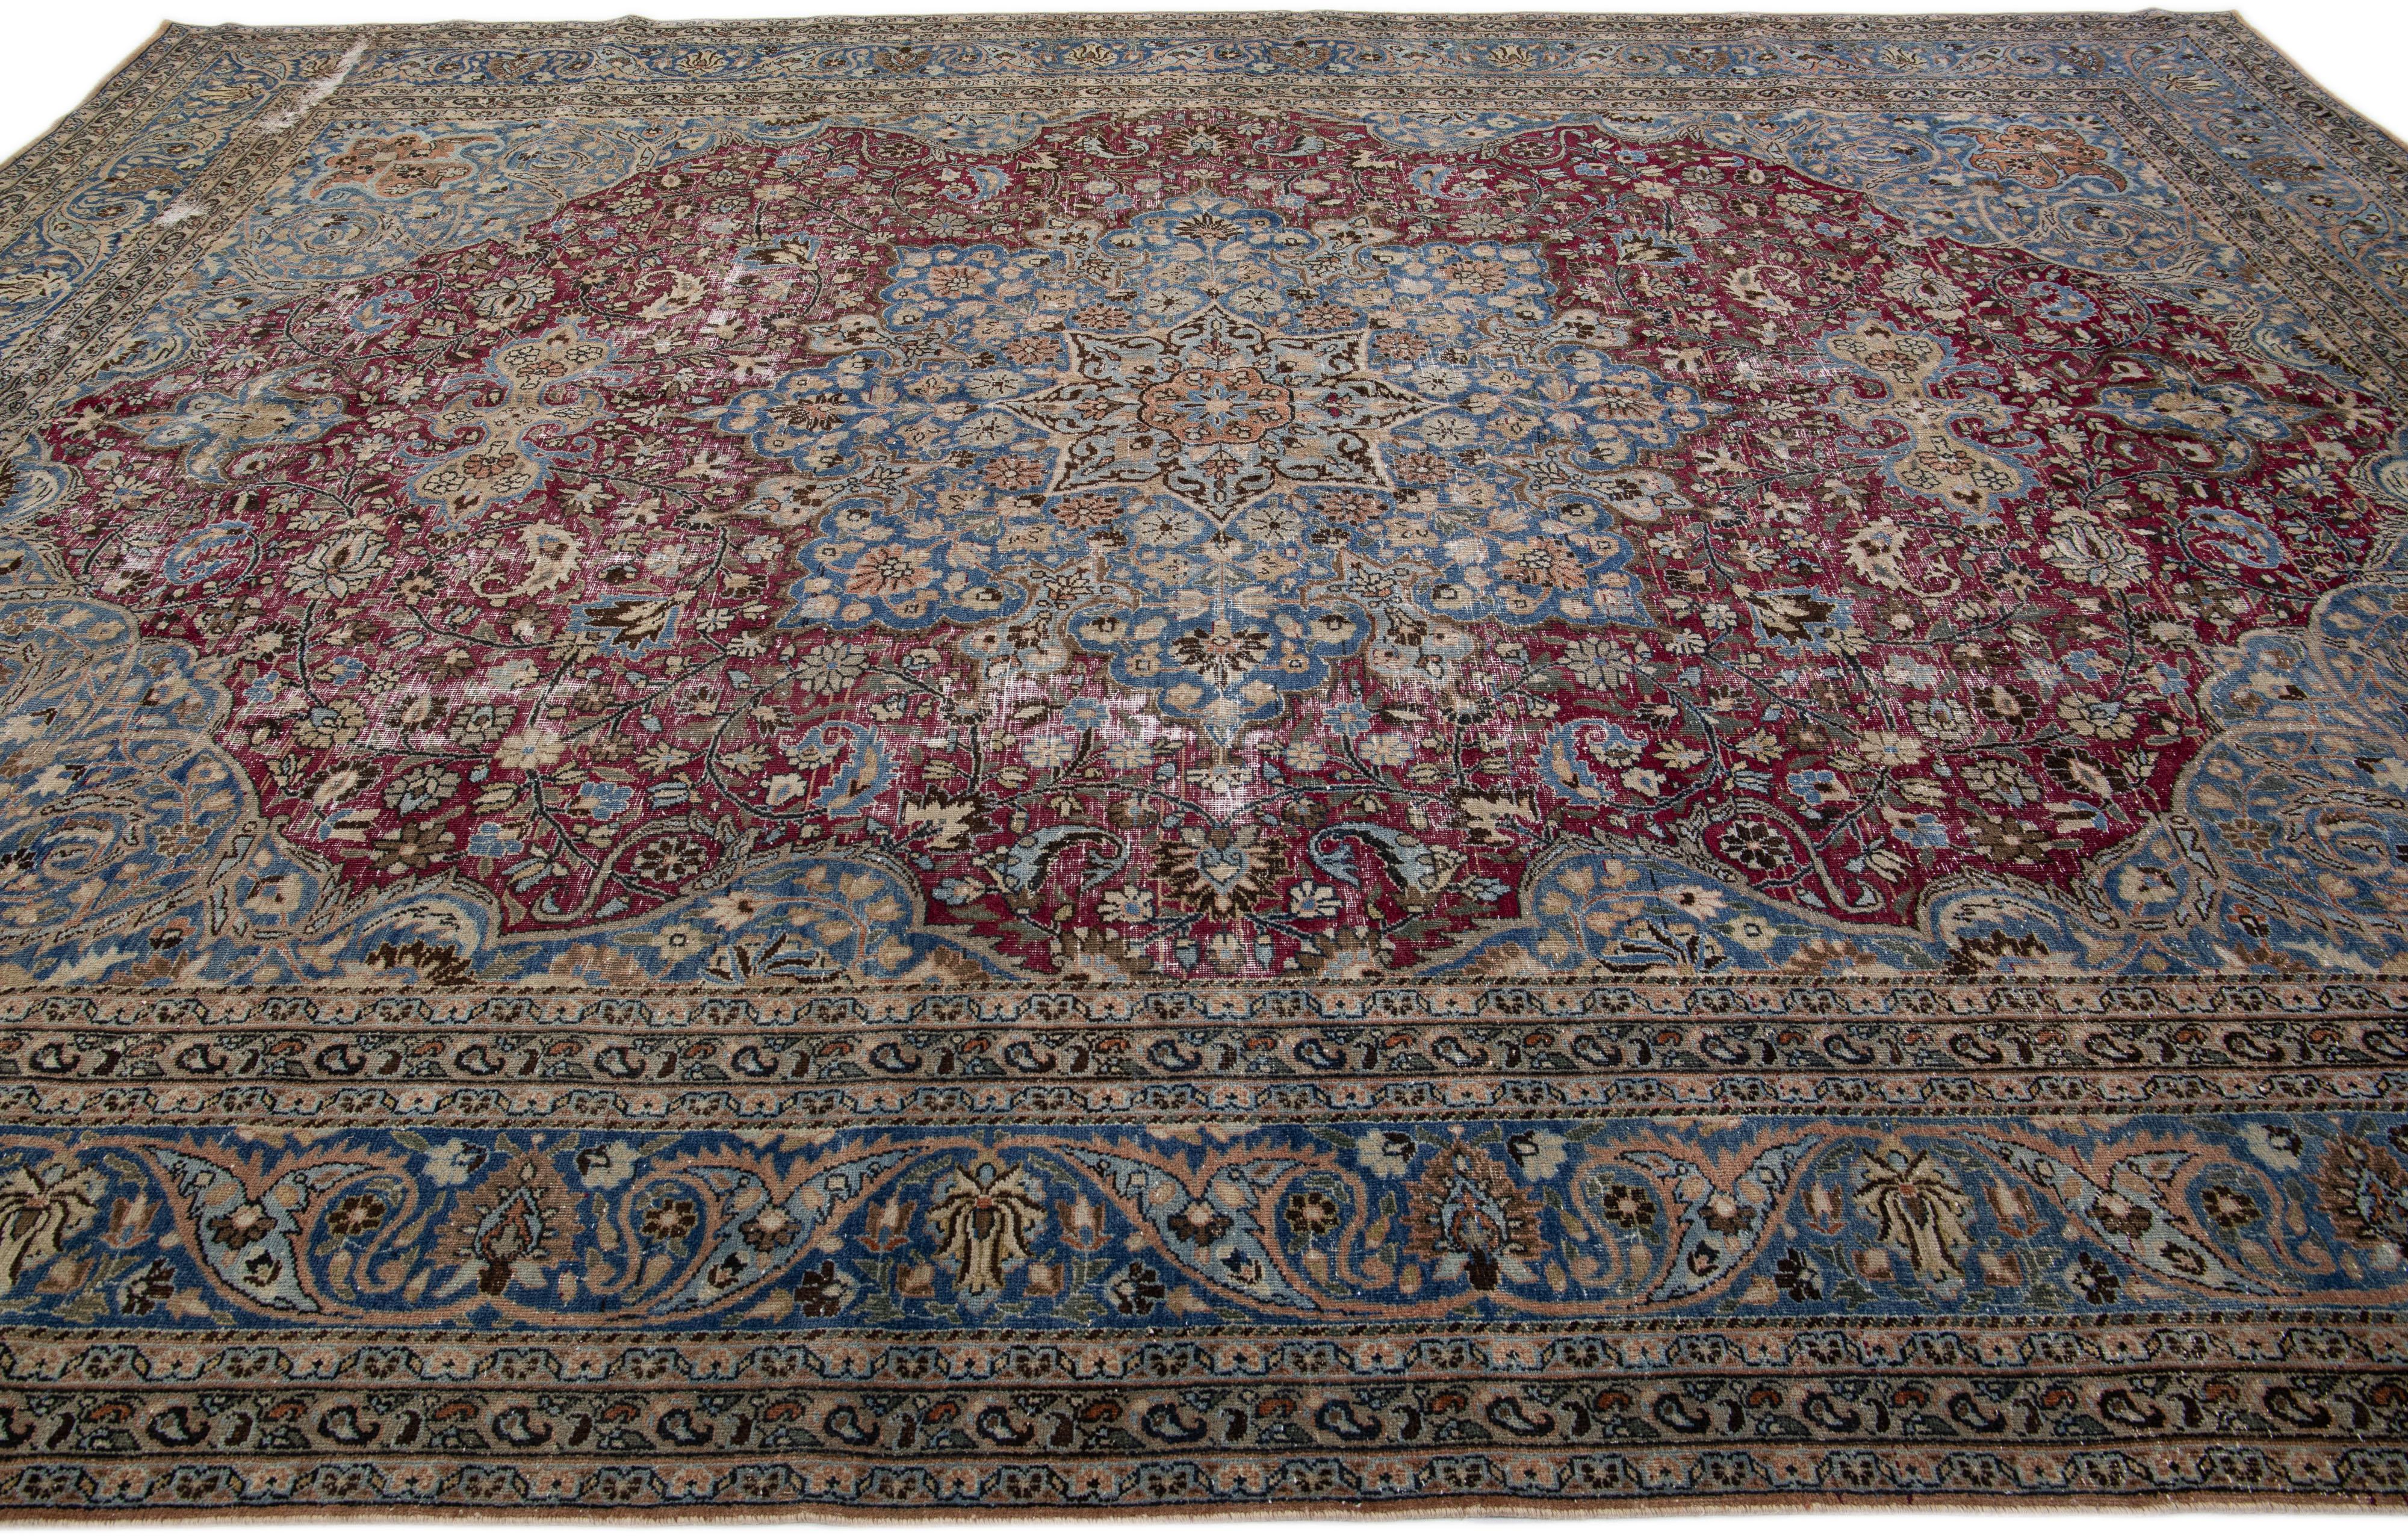 Antique Persian Mashad Red and Blue Handmade Wool Rug with Rosette Motif For Sale 1